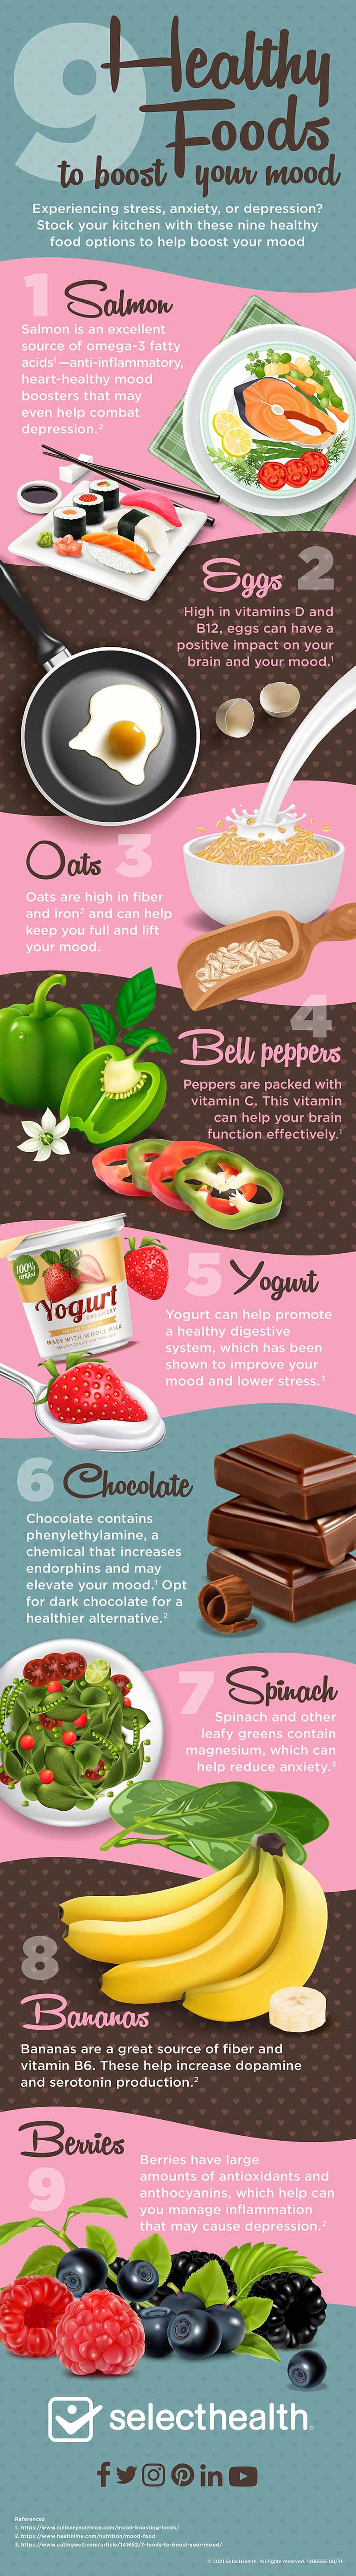 9 Healthy Foods to Boost Your Mood (Infographic)